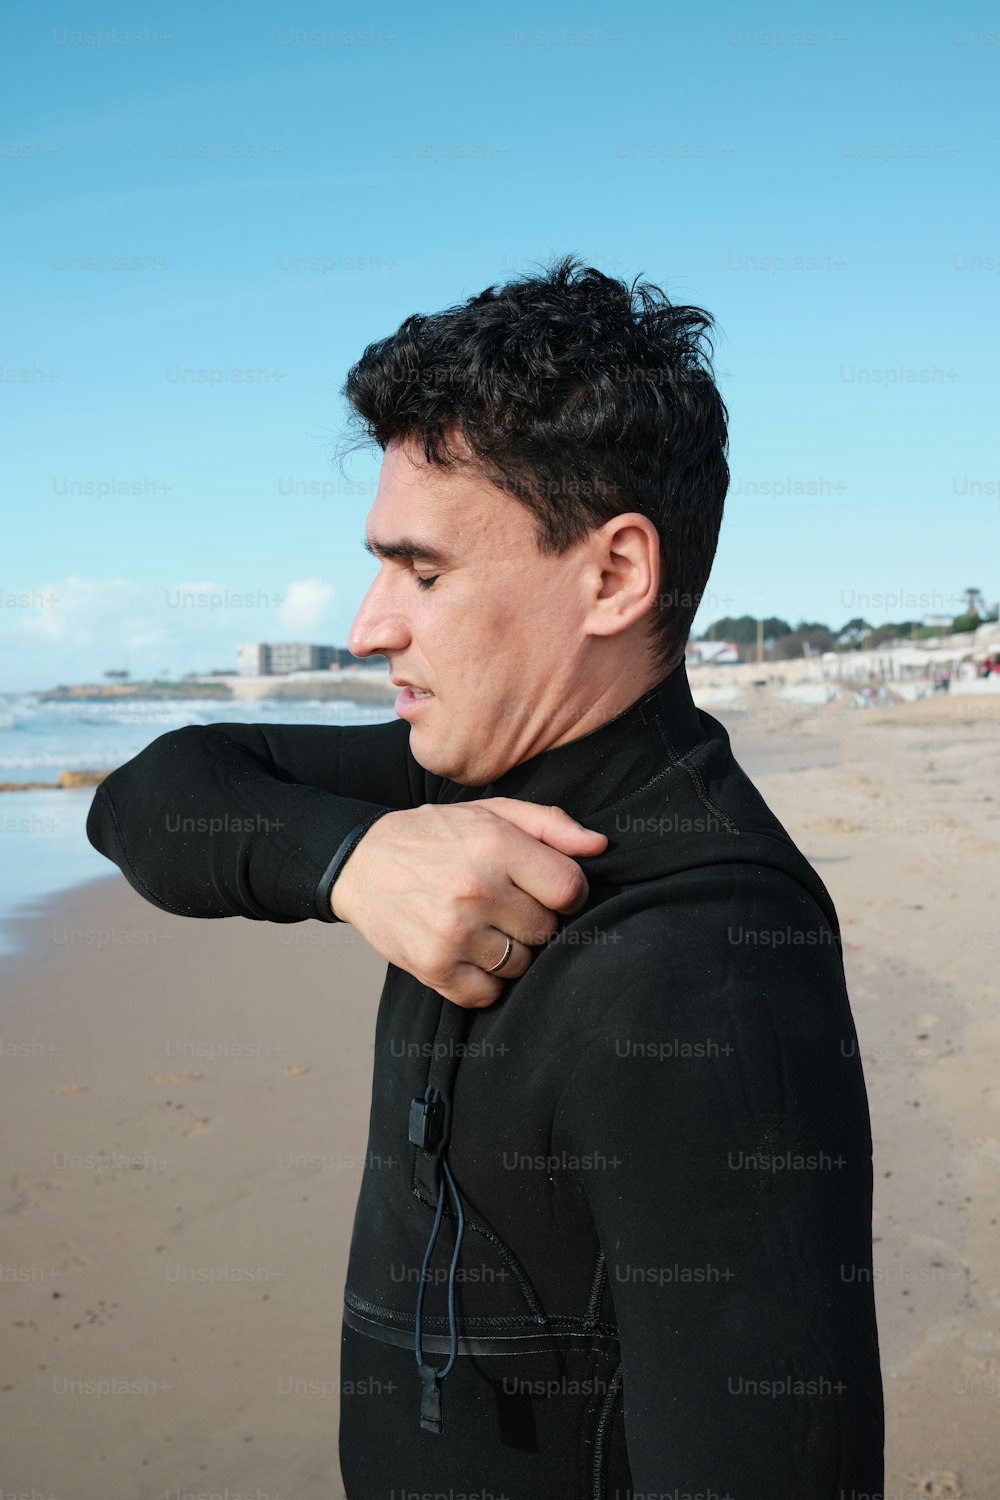 a man in a wet suit standing on a beach